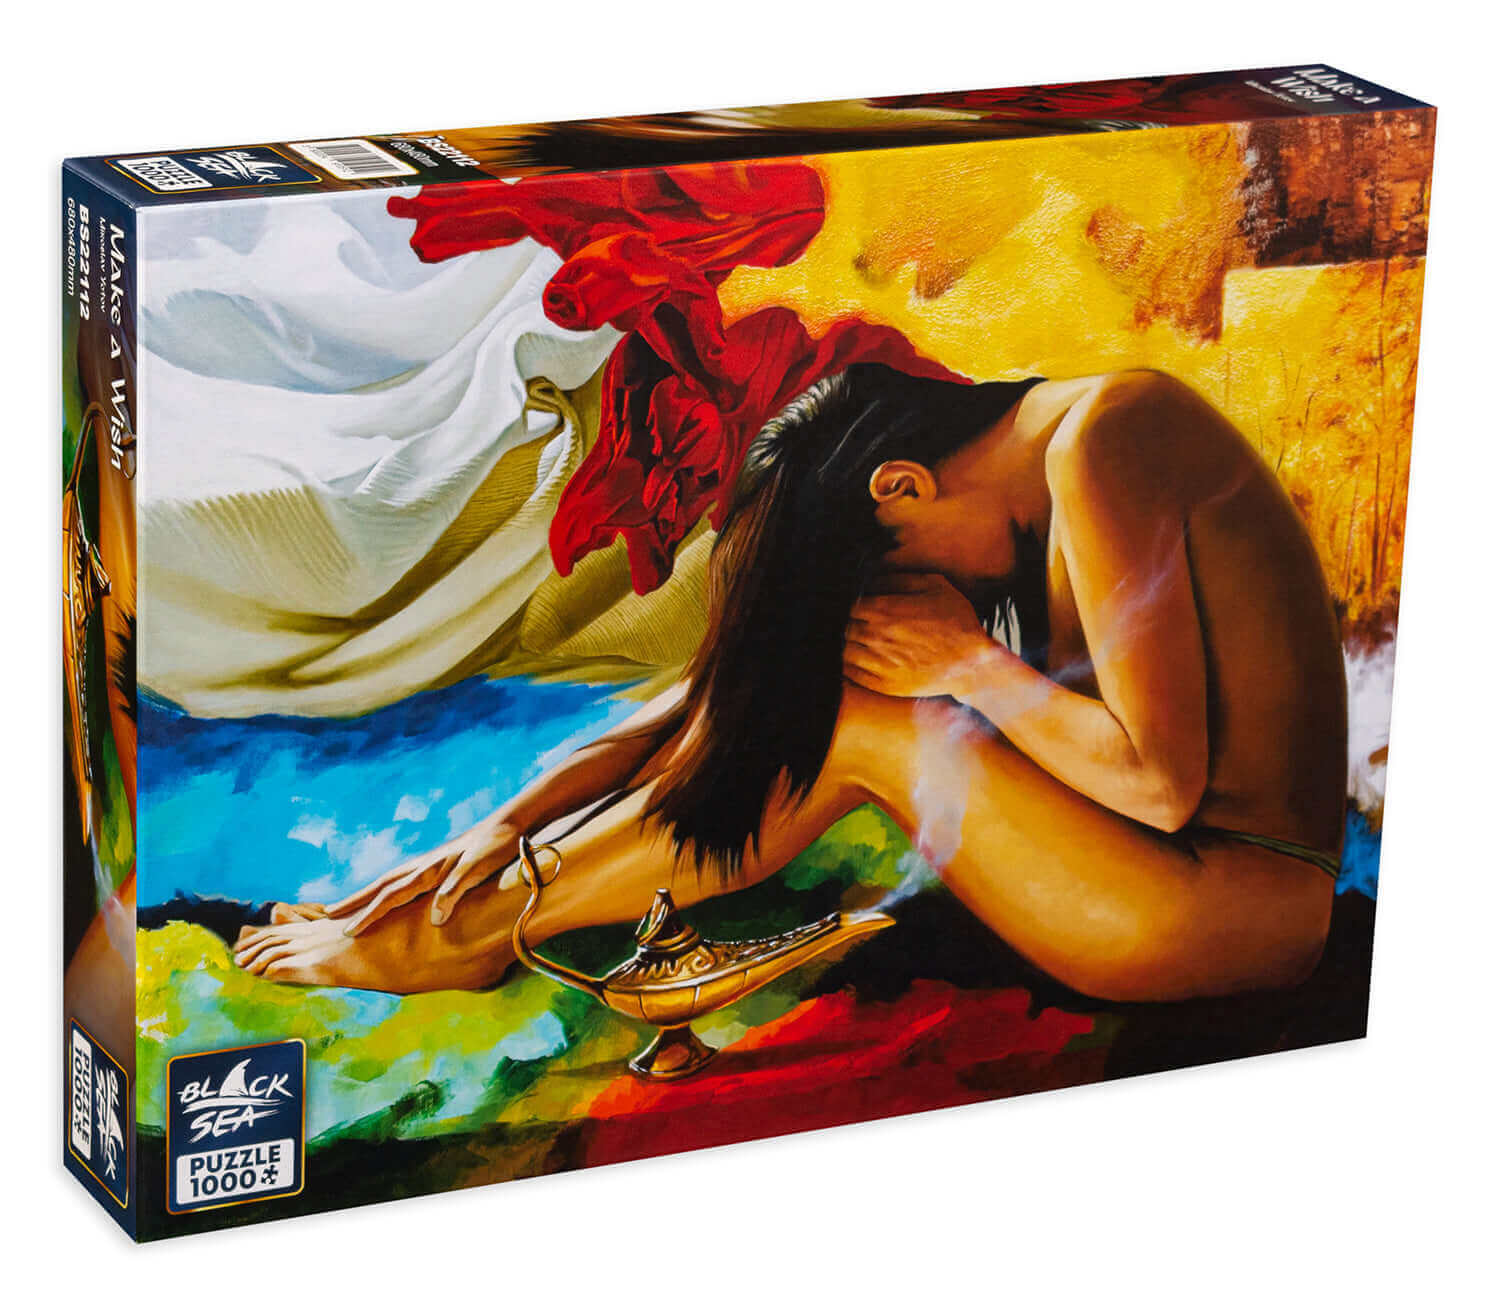 Puzzle Black Sea 1000 pieces - Make a Wish, When you take the magic lamp in your hands, you can open all doors before you. Fame, wealth, immortality? Anything you think of today can become a reality tomorrow. All you need to do is make a wish.Miroslav Yot